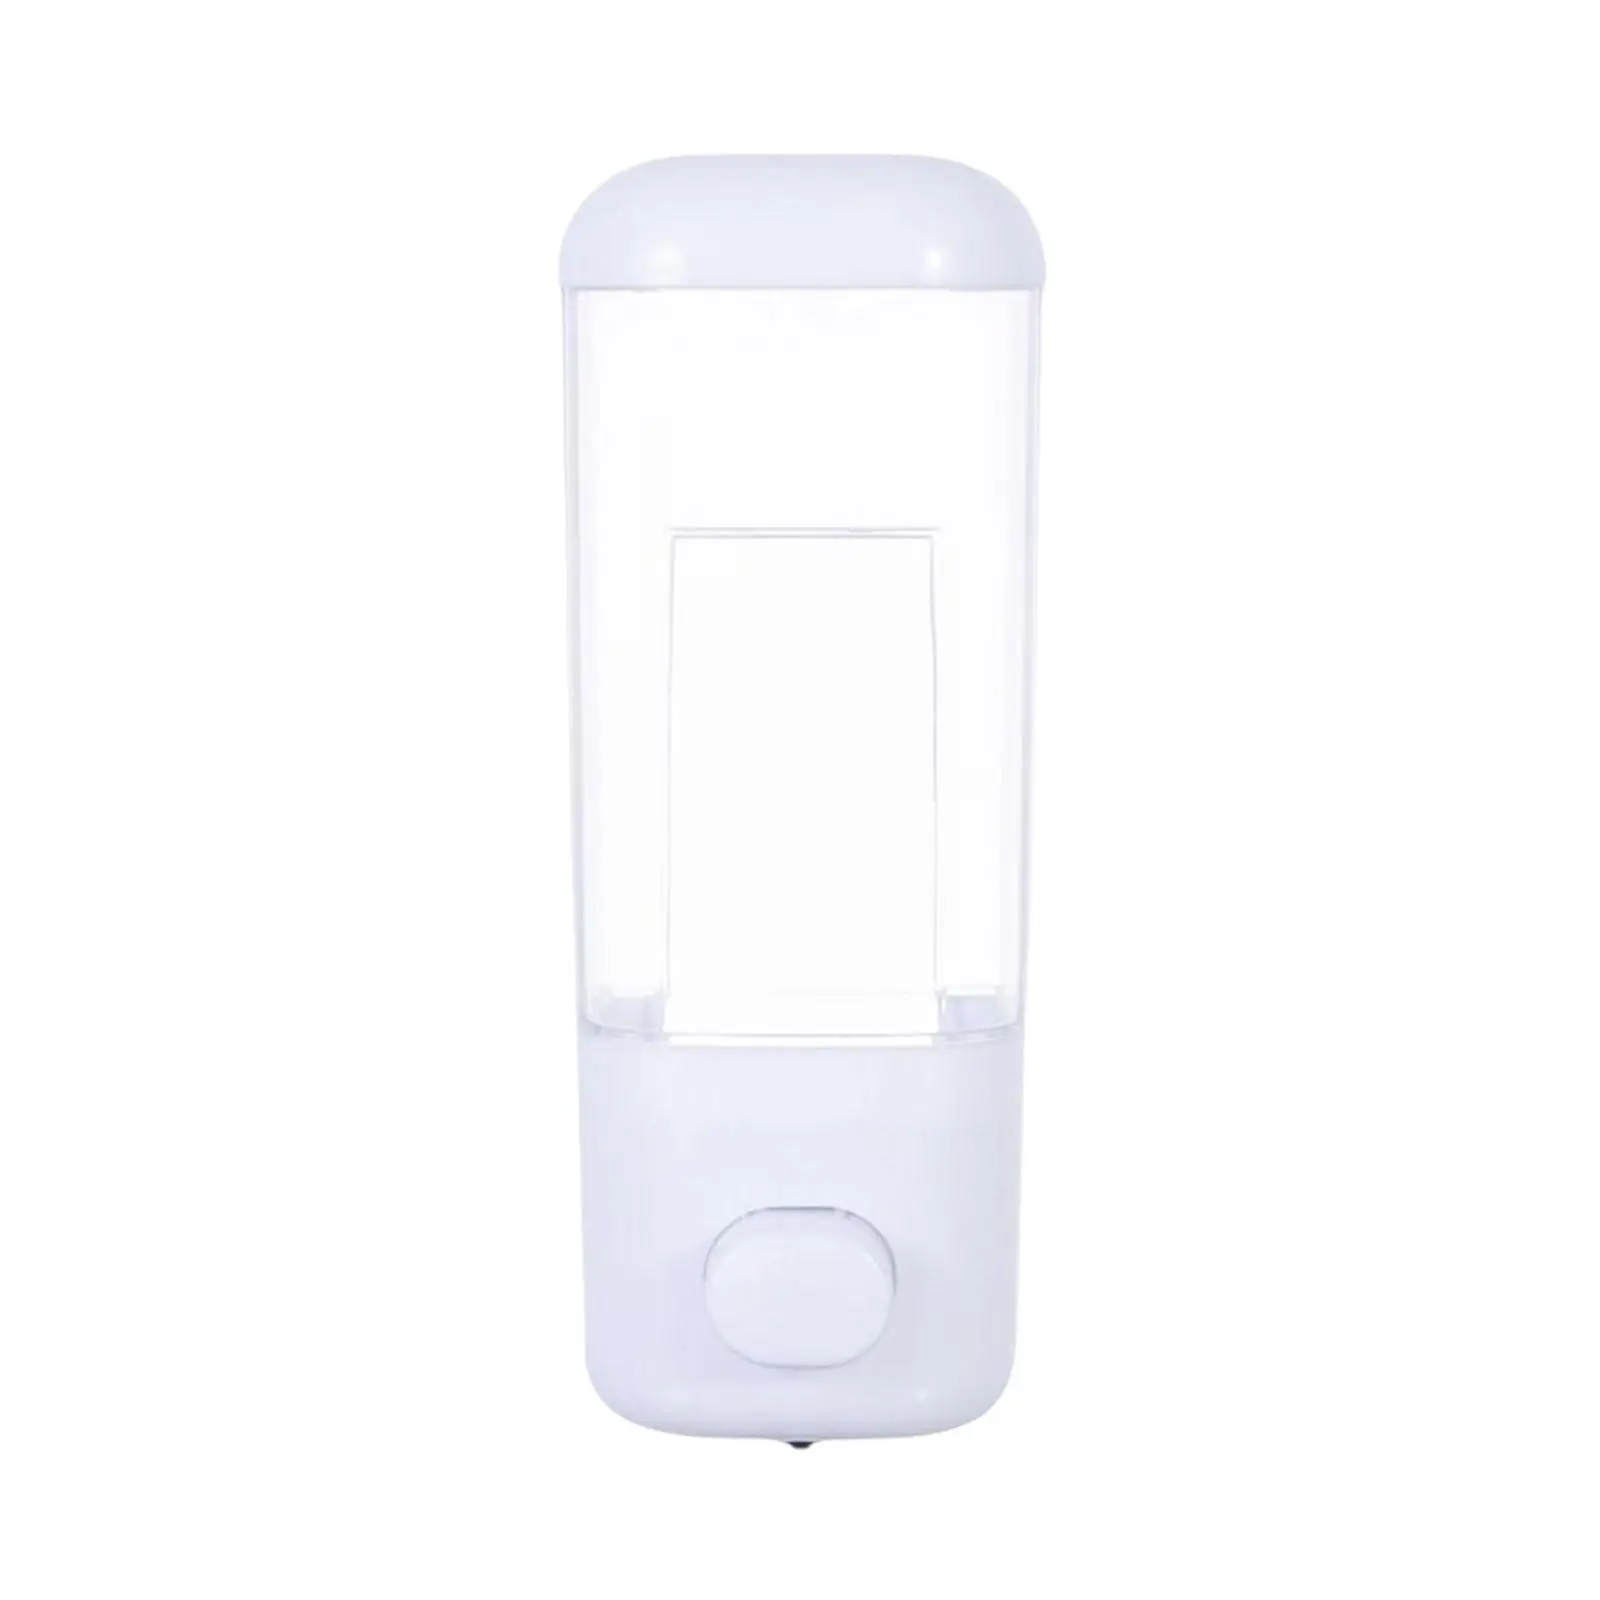 Wall Mounted Manual Soap Dispenser Liquid Dispenser modern and clear Plastic container for Kitchen Hotel home